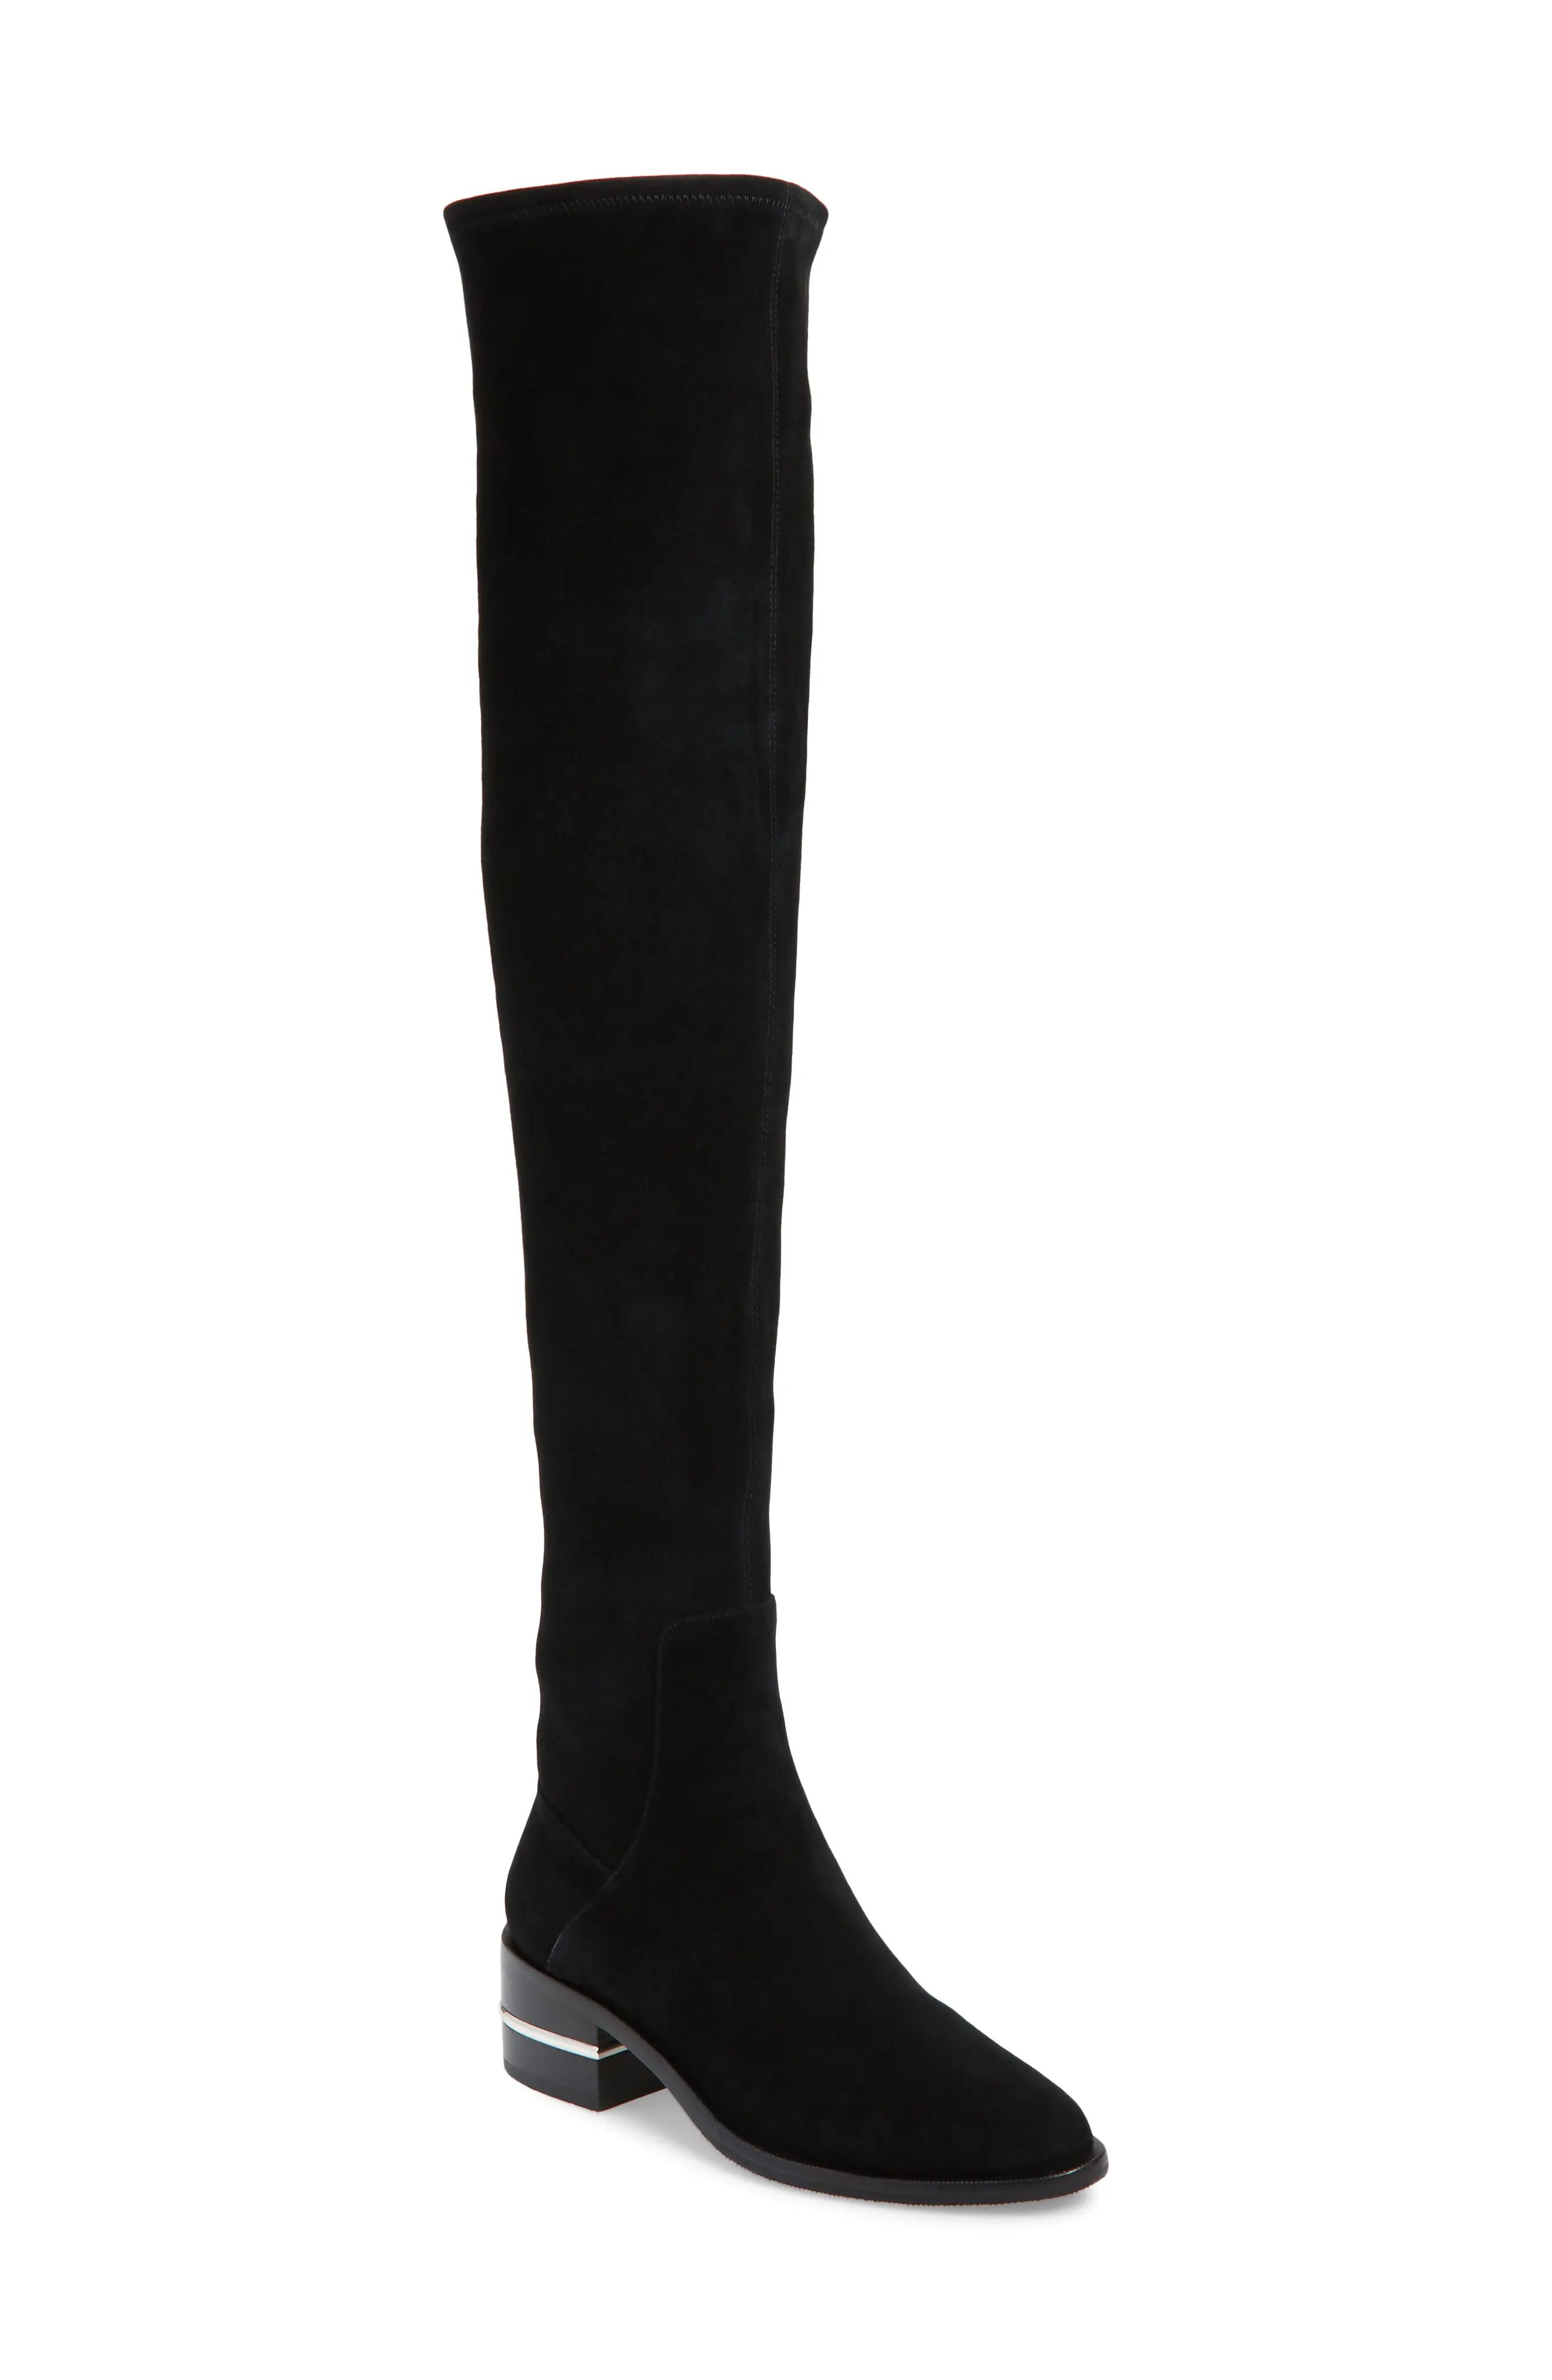 PAIGE Jacey Over the Knee Stretch Boot at Nordstrom Rack | Nordstrom Rack